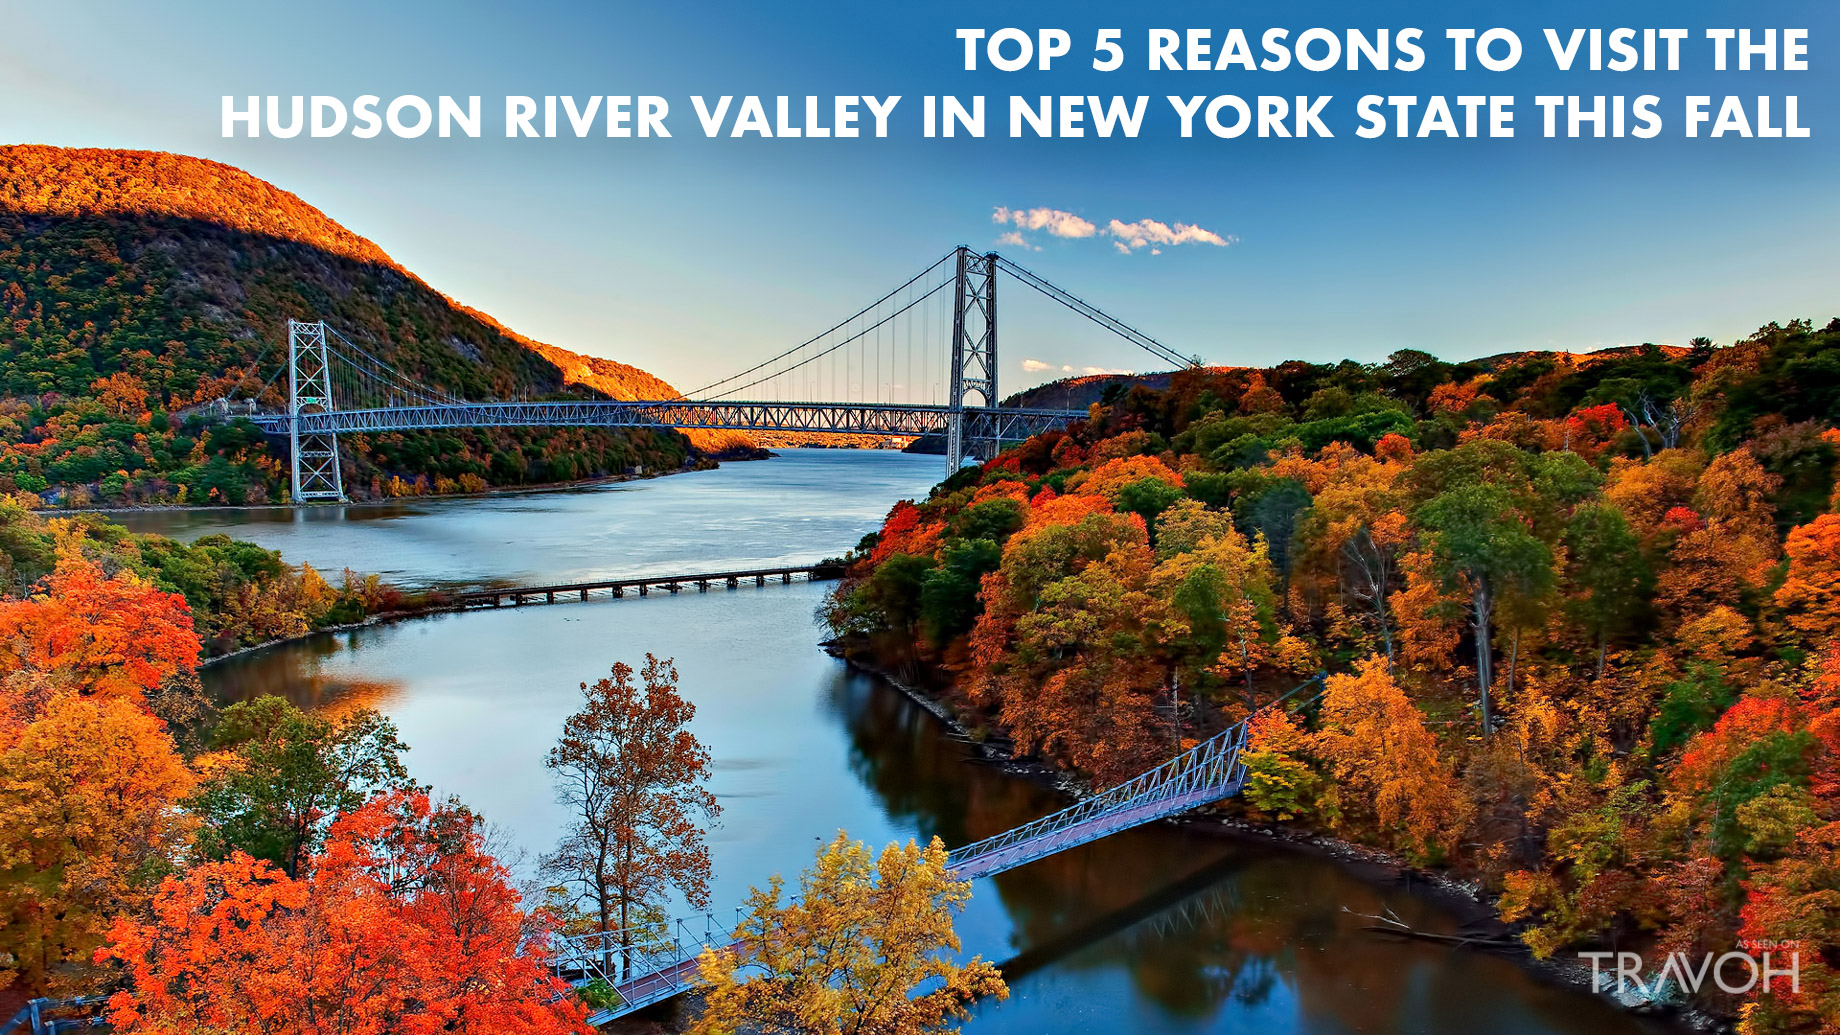 Top 5 Reasons to Visit the Hudson River Valley in New York State This Fall